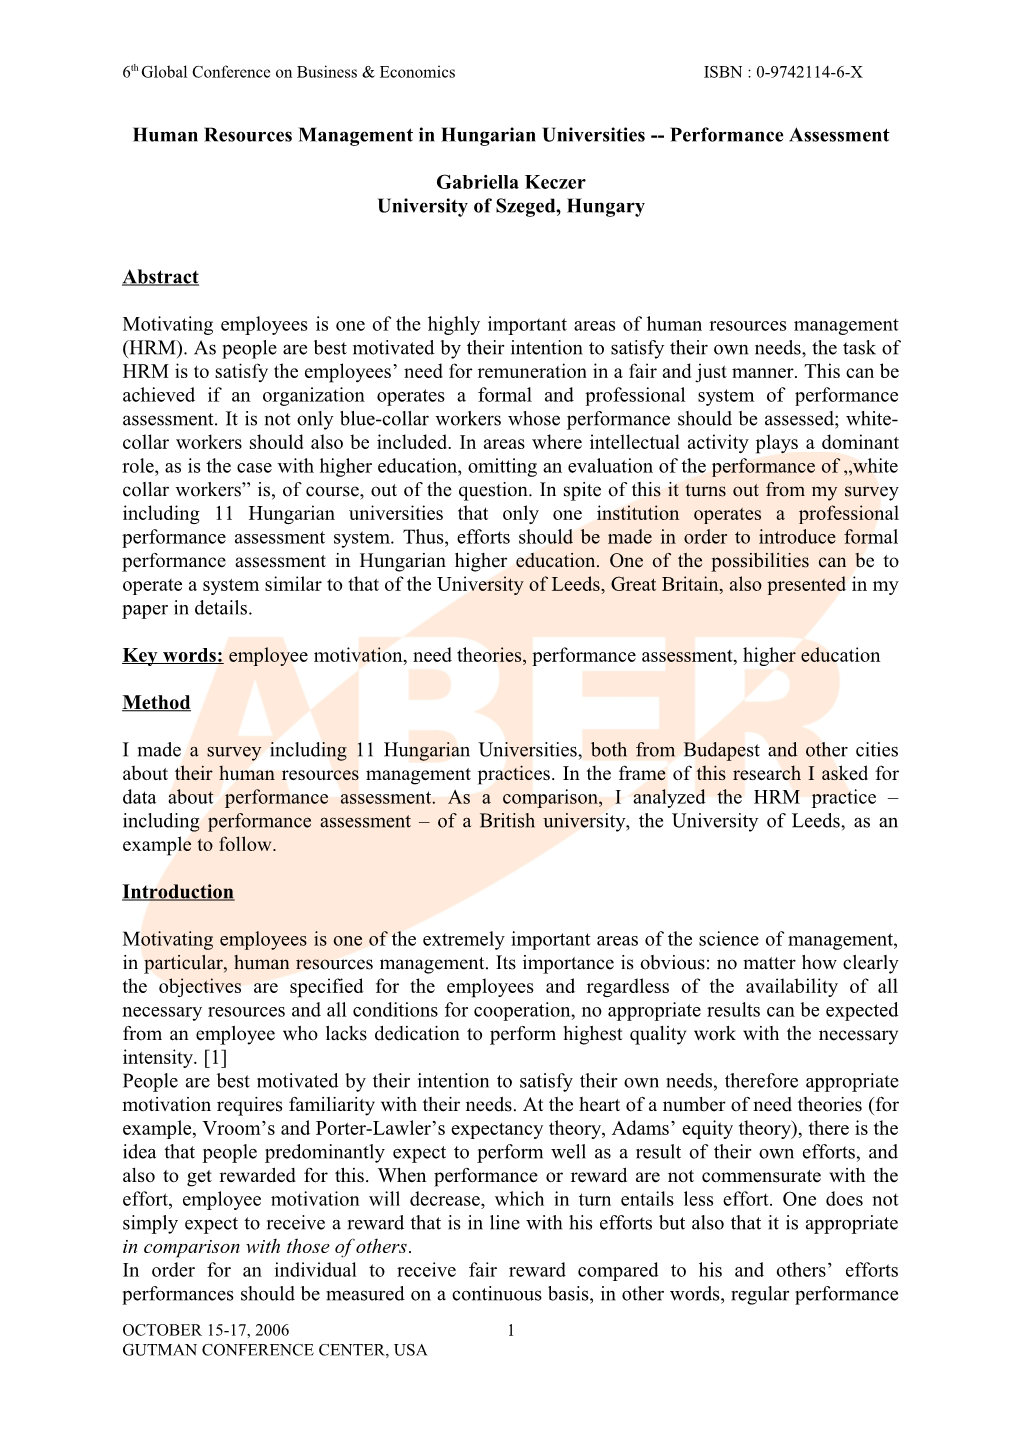 Human Resources Management in Hungarian Universities Performance Assessment